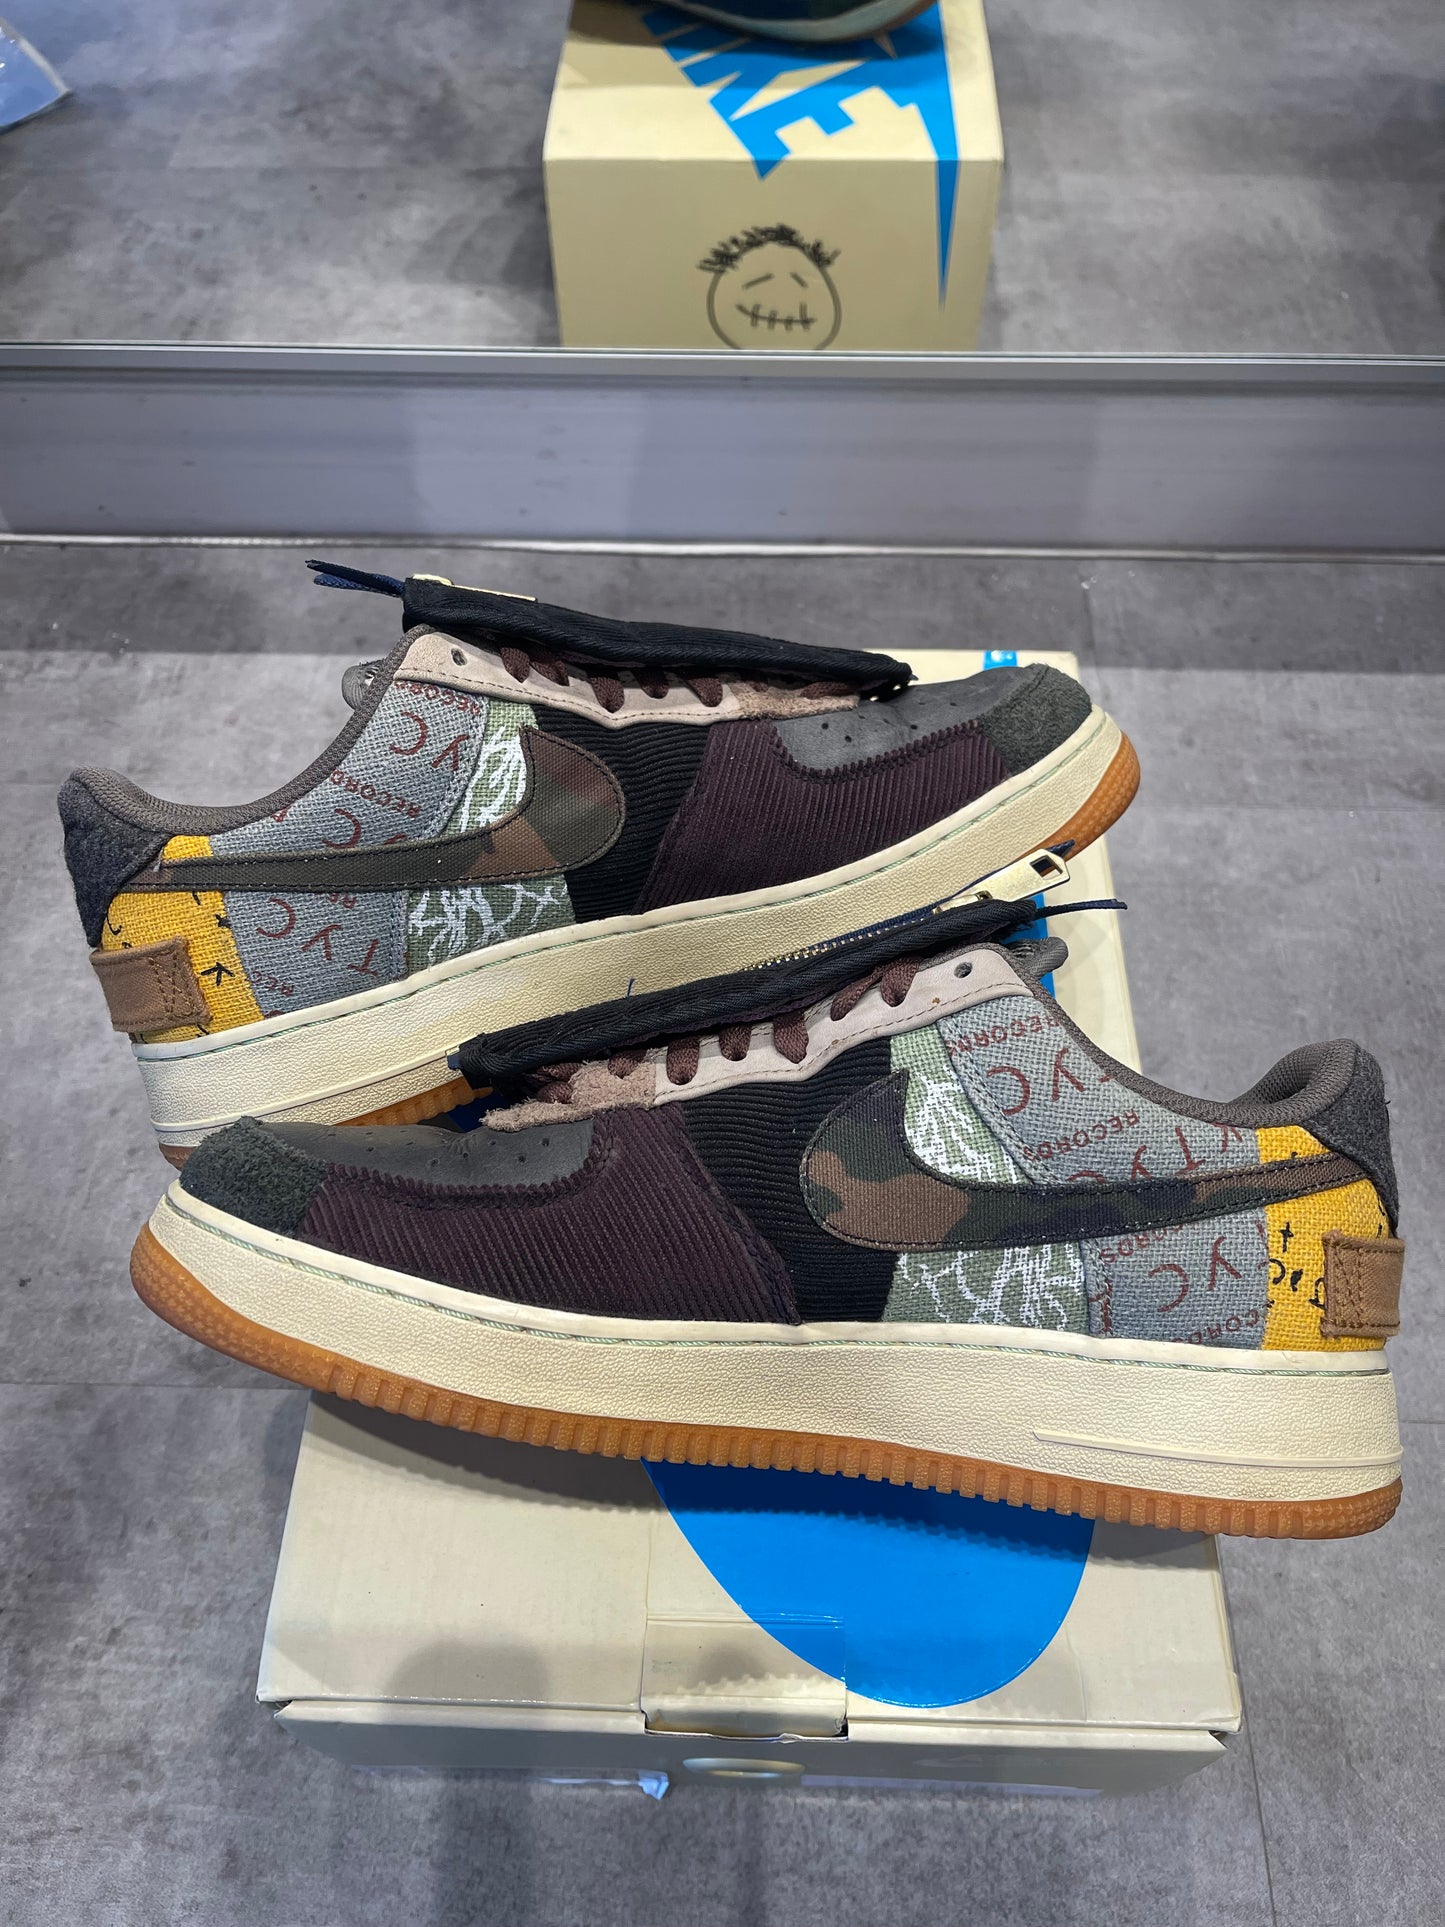 Nike Air Force 1 Low Travis Scott Cactus Jack (Preowned Size 11)